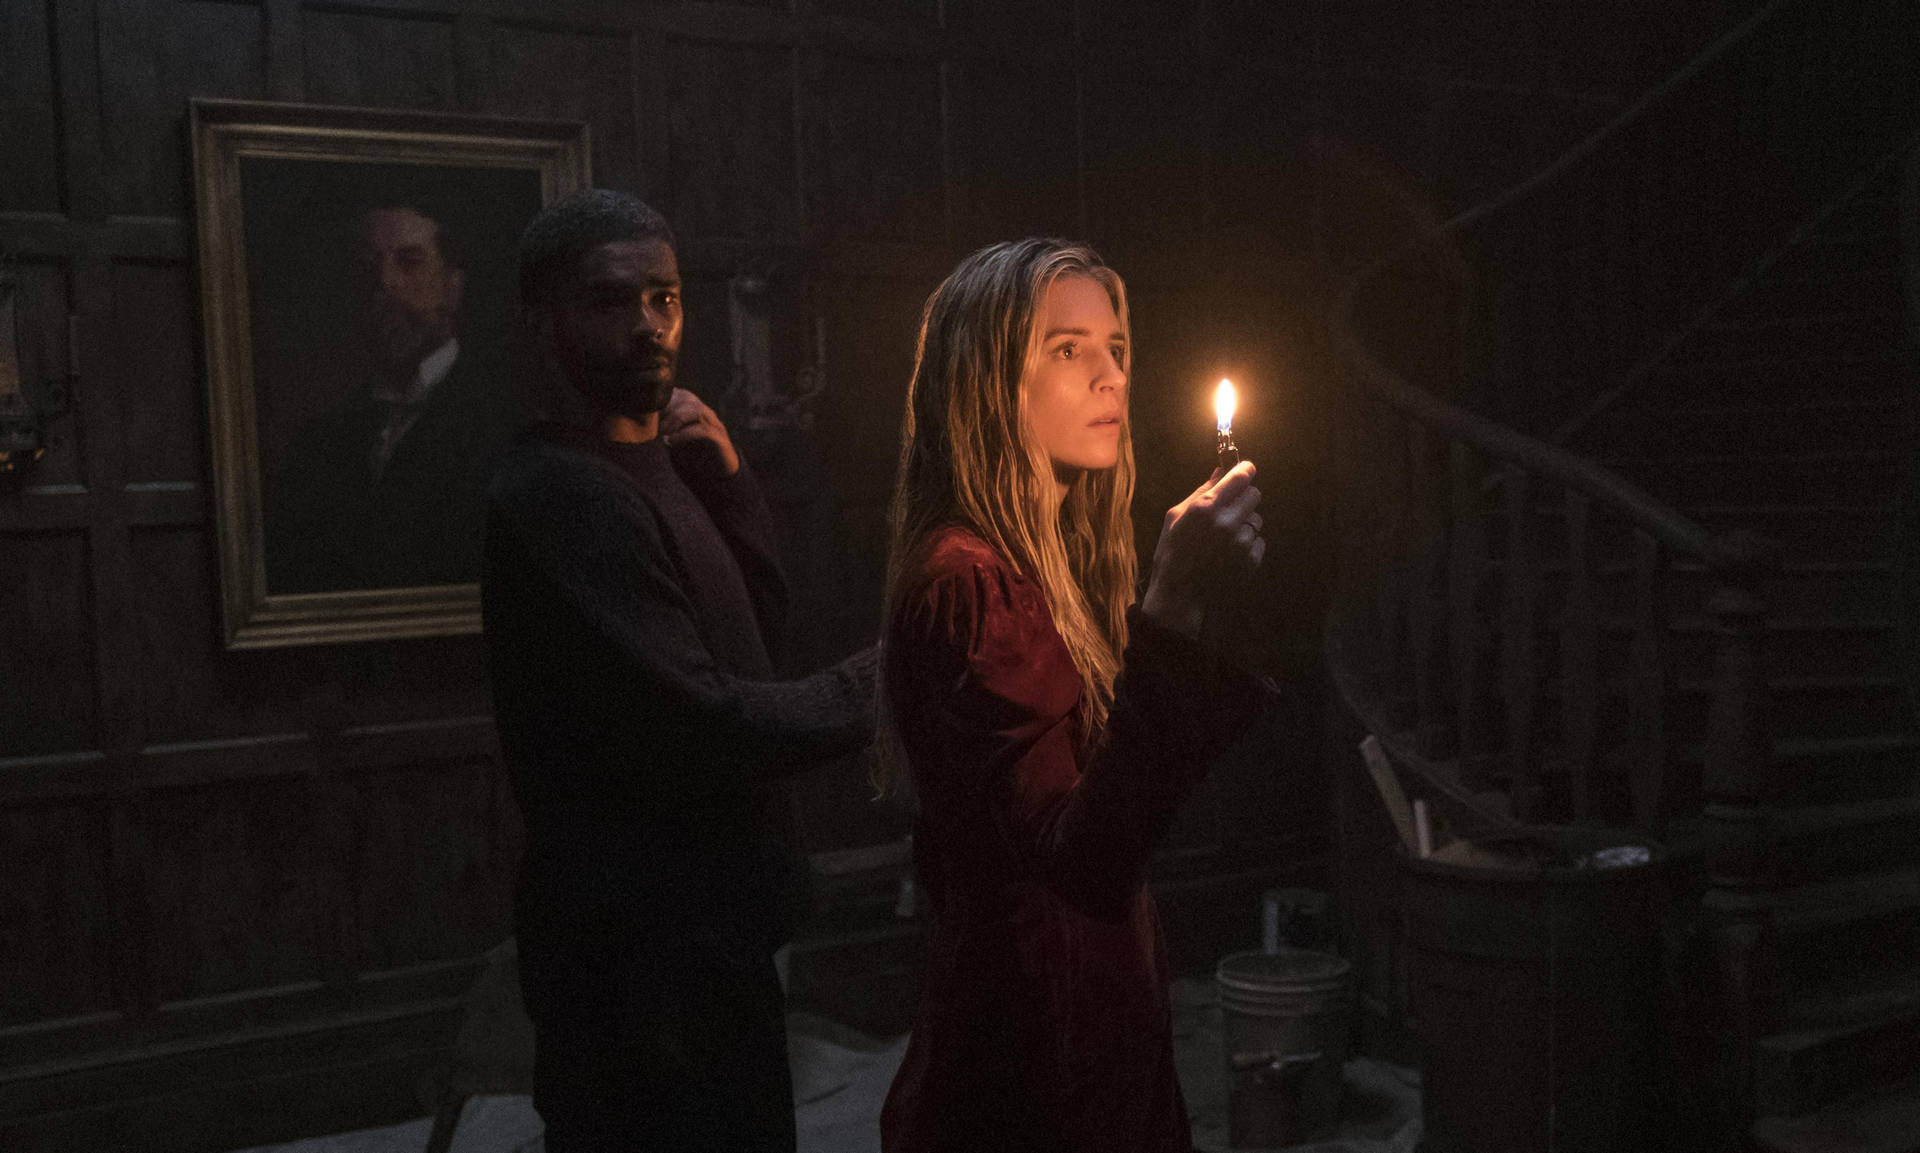 Prairie Holding A Candle In The Oa Series